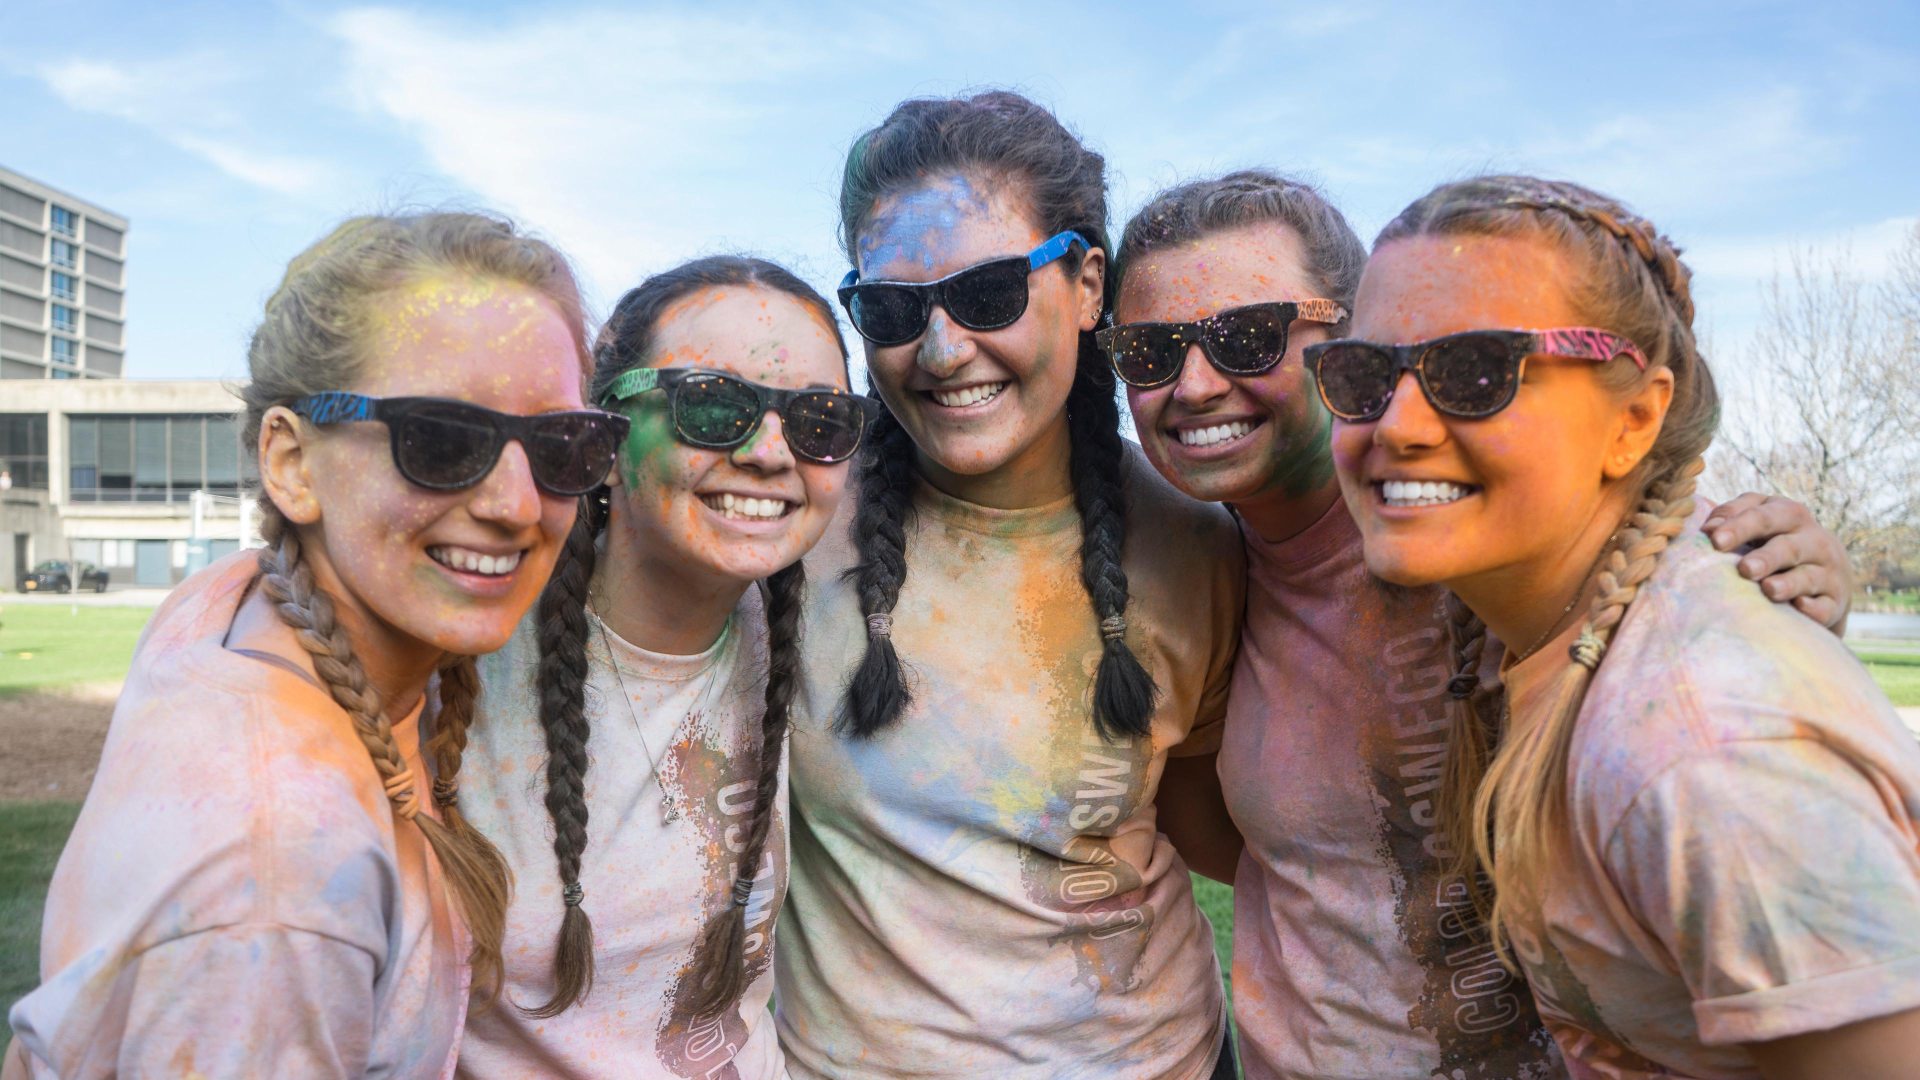 A group of women wearing sunglasses, shorts, and white T-shirts with colored powder on them from doing a Color Run